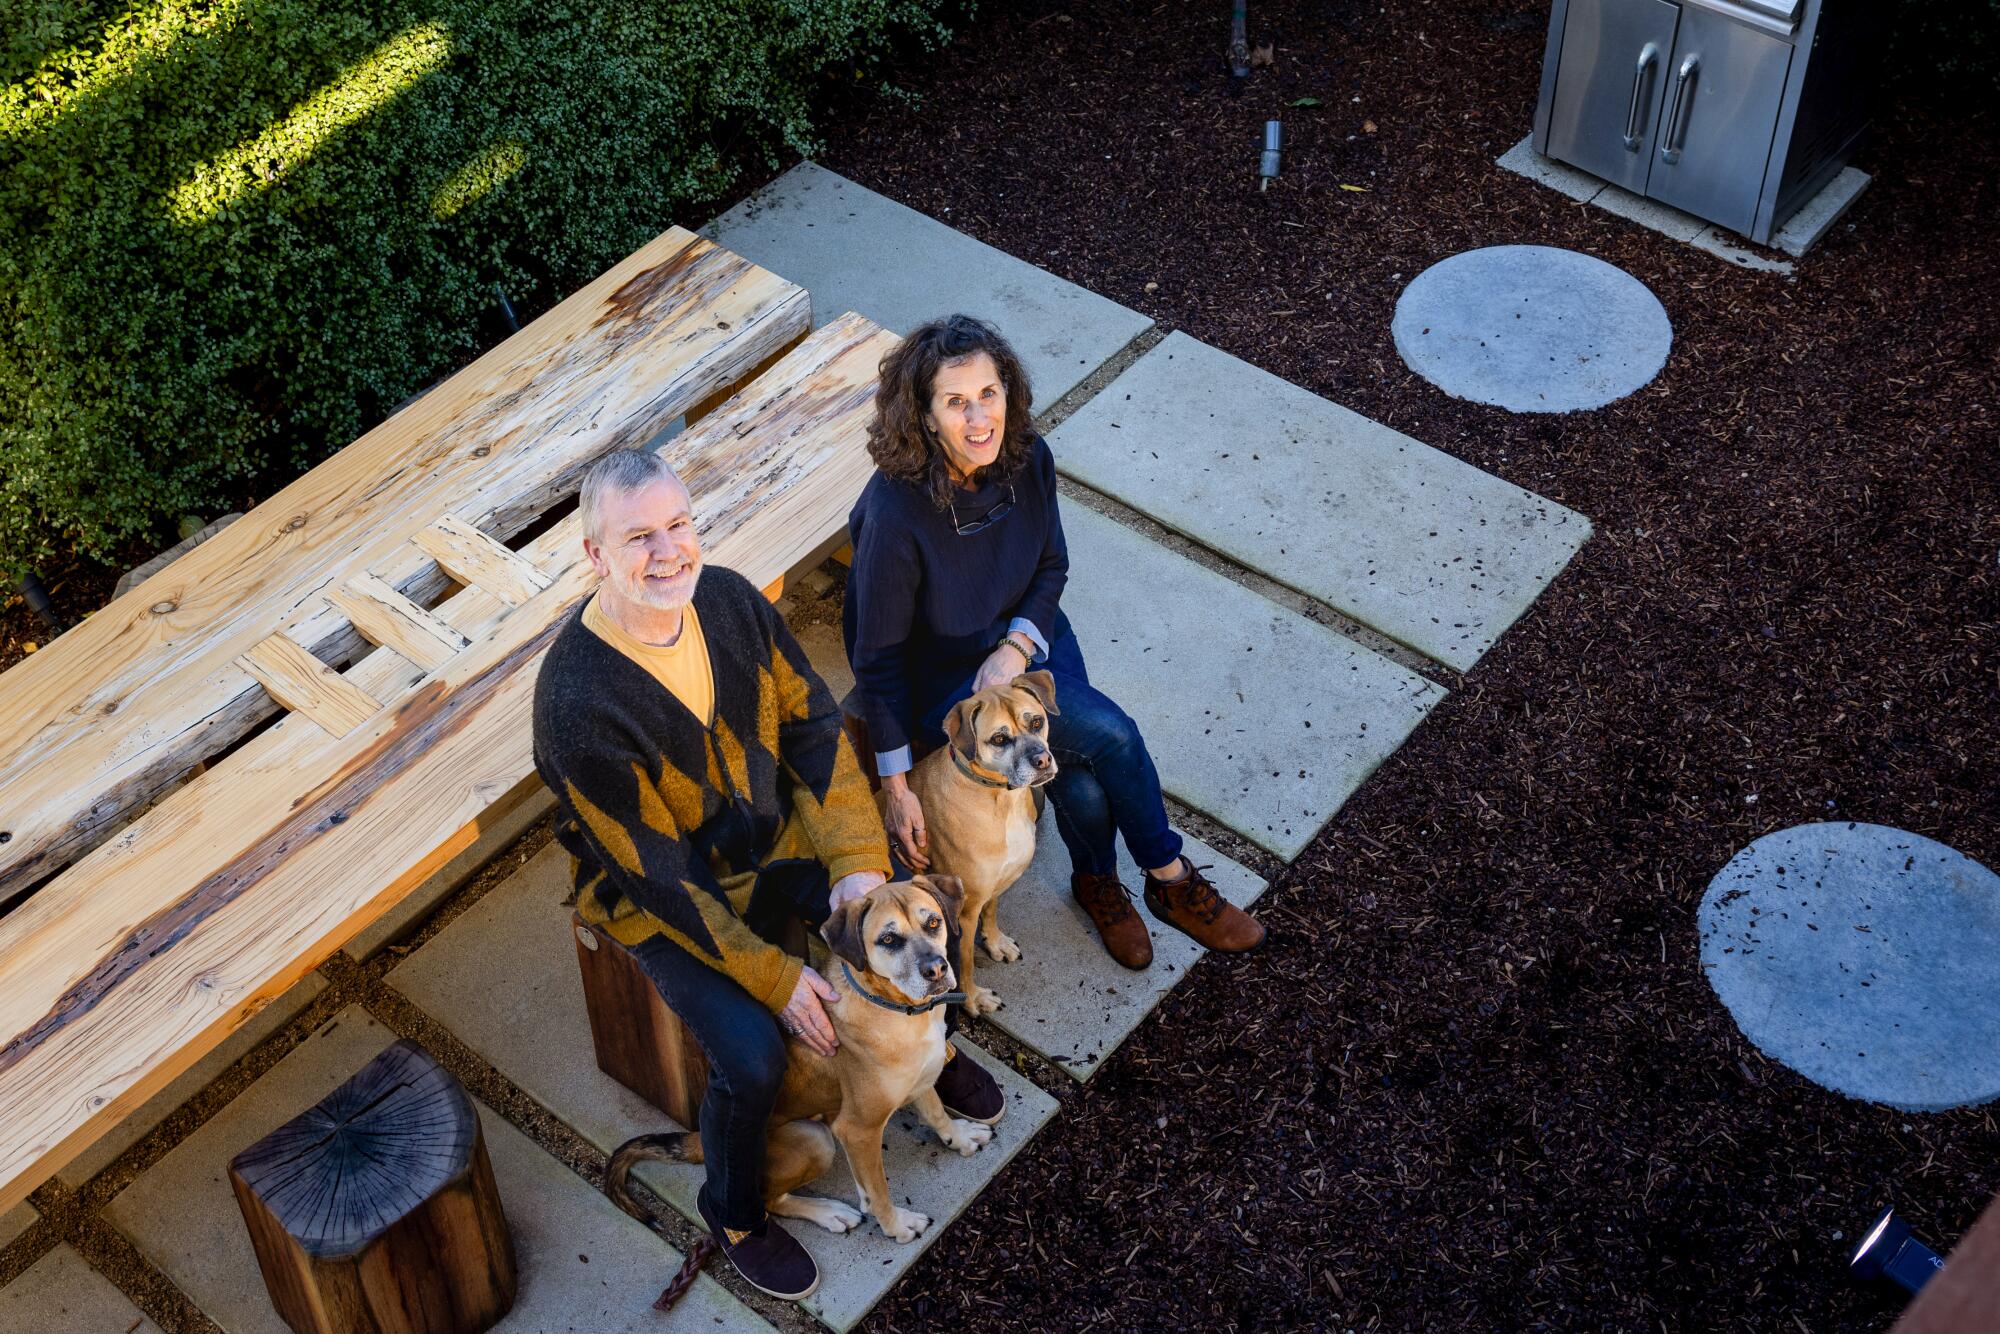 Architects Jefferson Schierbeek and Su Addison look up while sitting at a backyard table with two dogs at their feet.